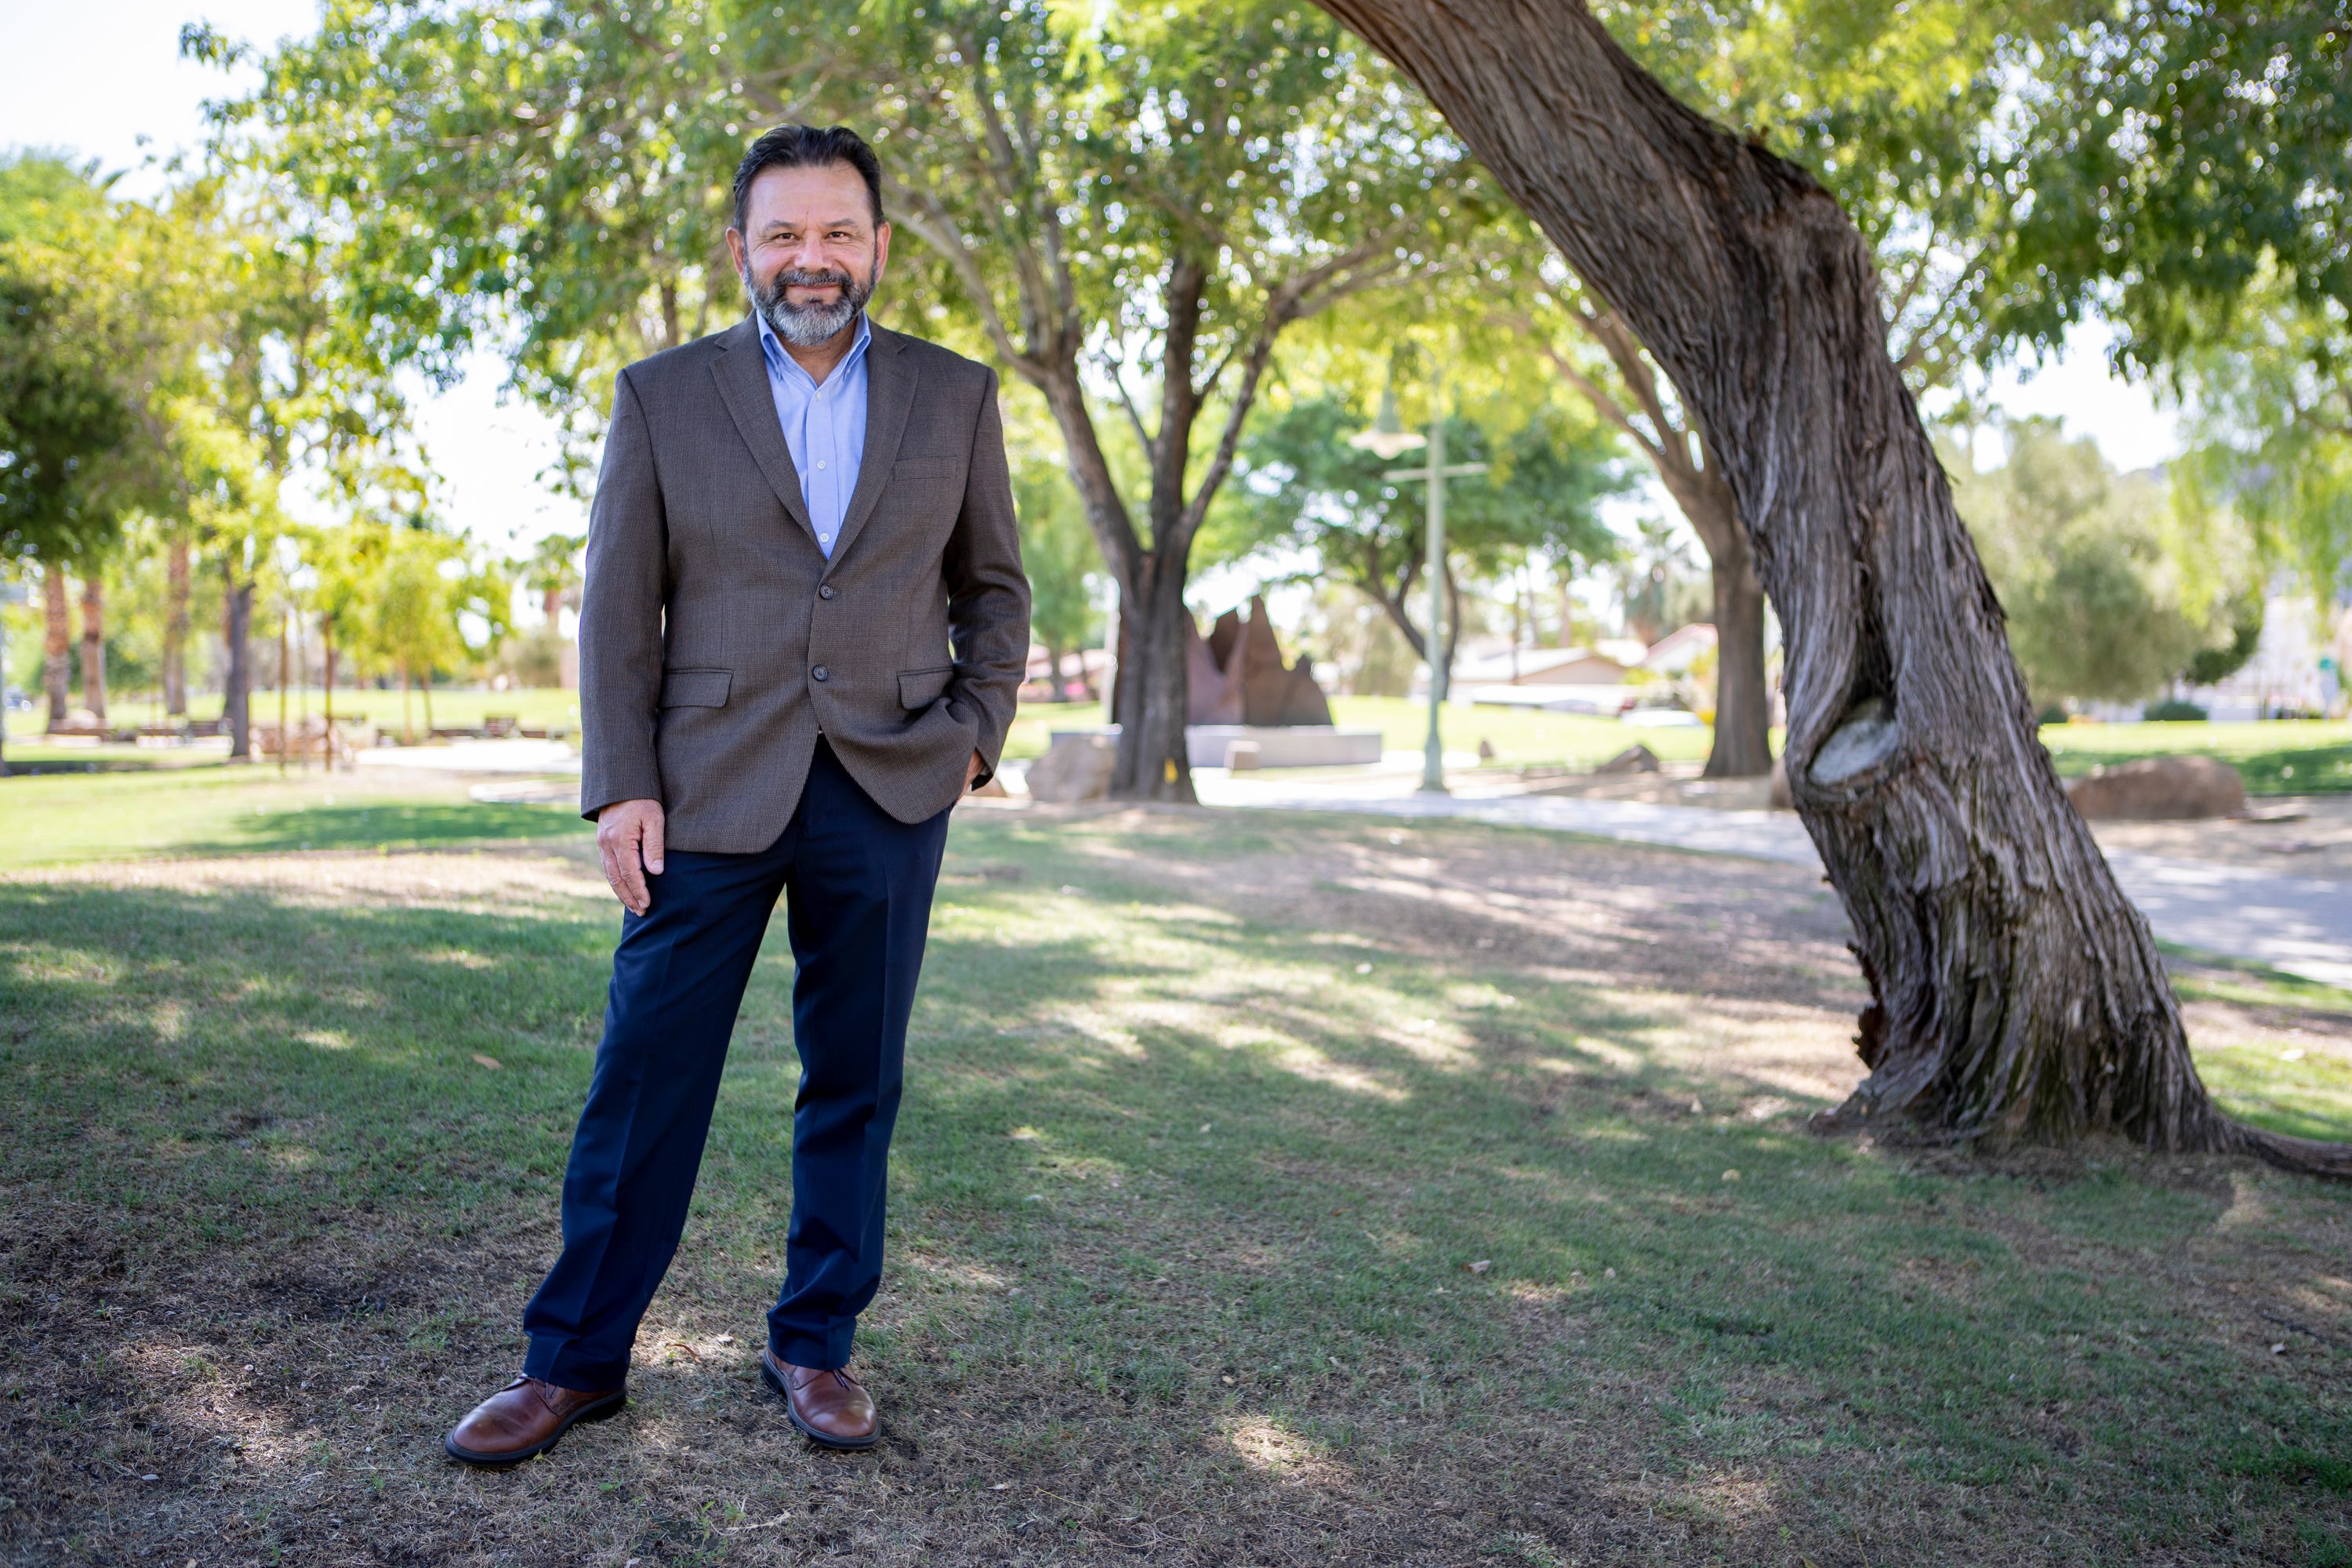 Pueblo Unido CDC Founder and Executive Director Sergio Carranza works to bring sustainable infrastructure to rural communities in the eastern Coachella Valley. Carranza is photographed near his office in La Quinta, Calif., on August 12, 2020.